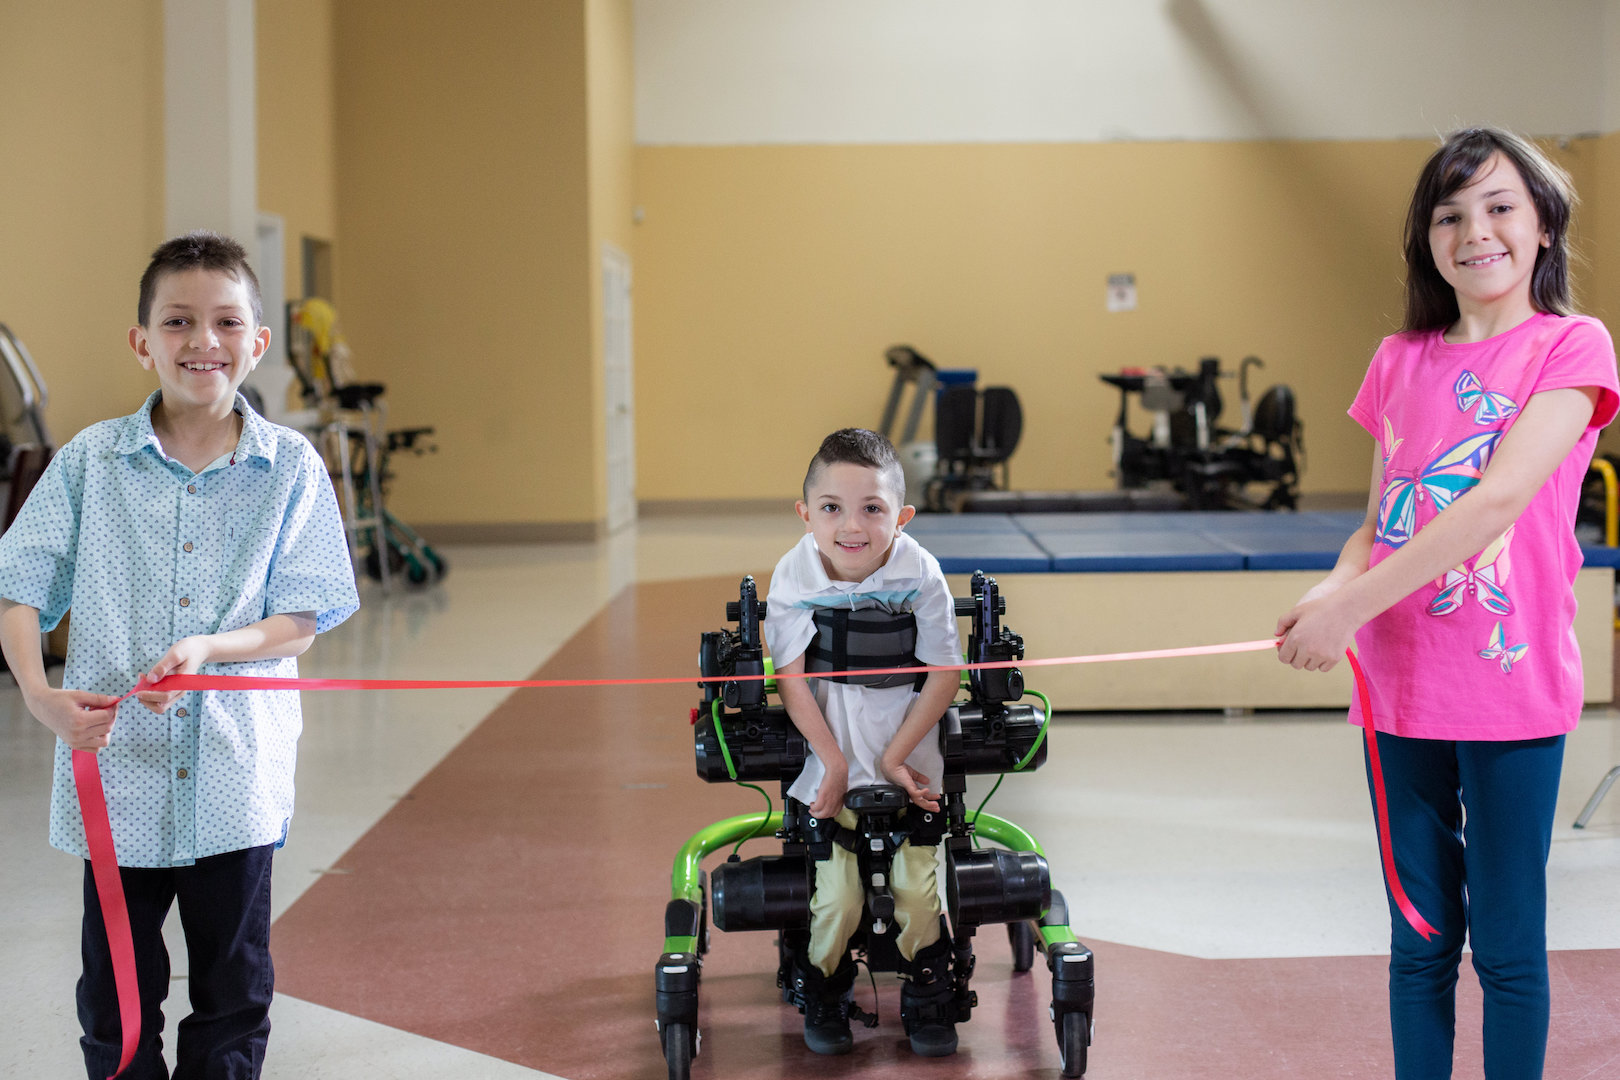 This Inventive Robo-Walker Gives Kids With Cerebral Palsy a New Way to Move